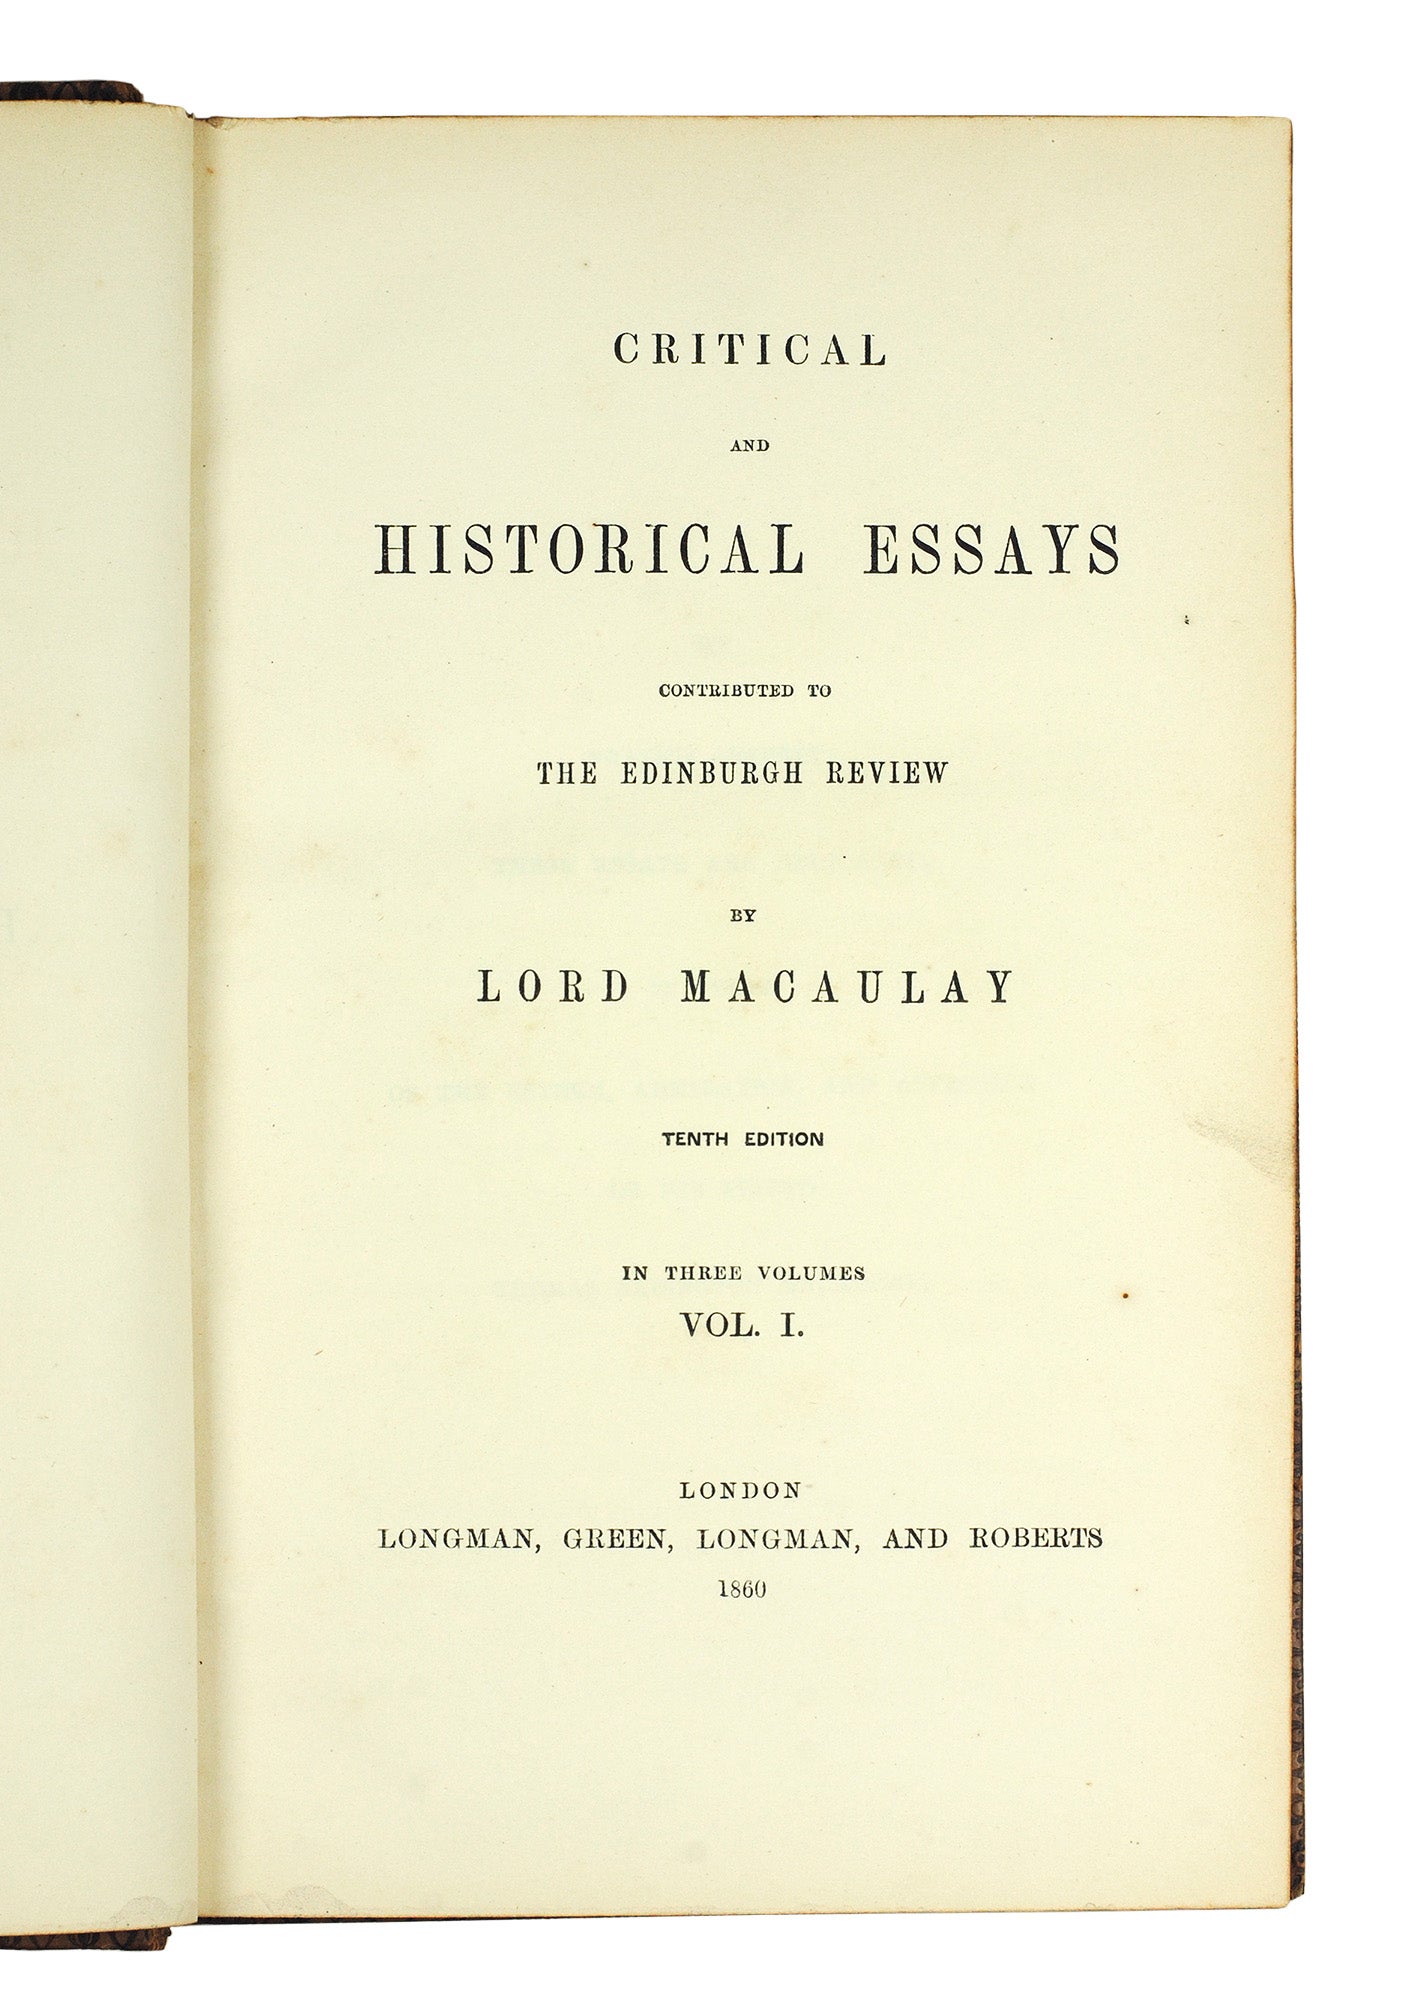 critical and historical essays